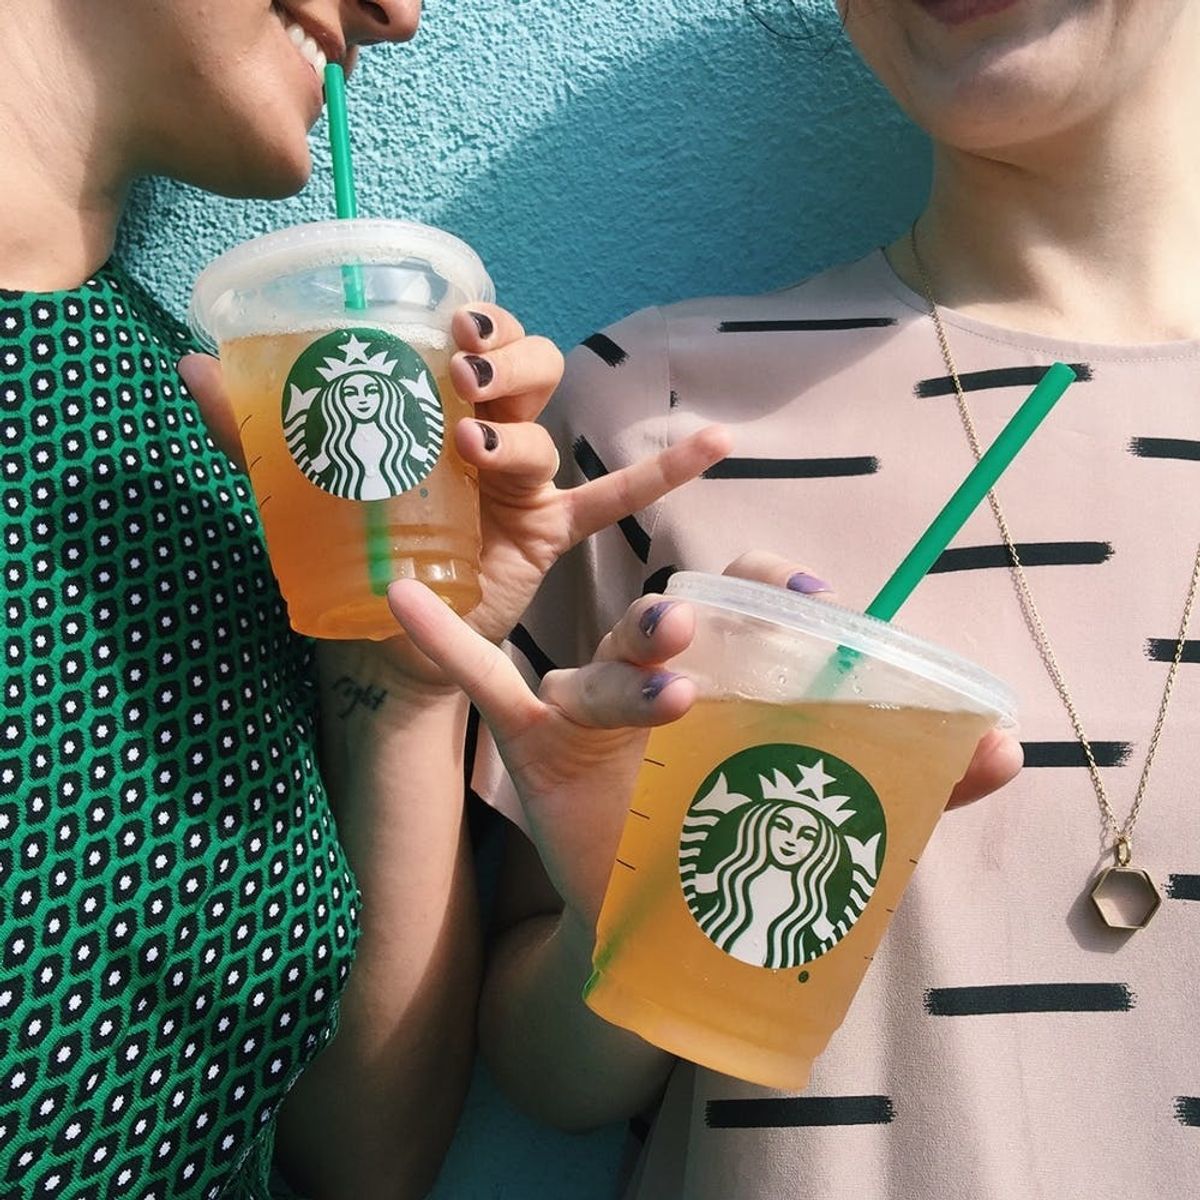 Find Out How to Get a Free Starbucks Drink Today